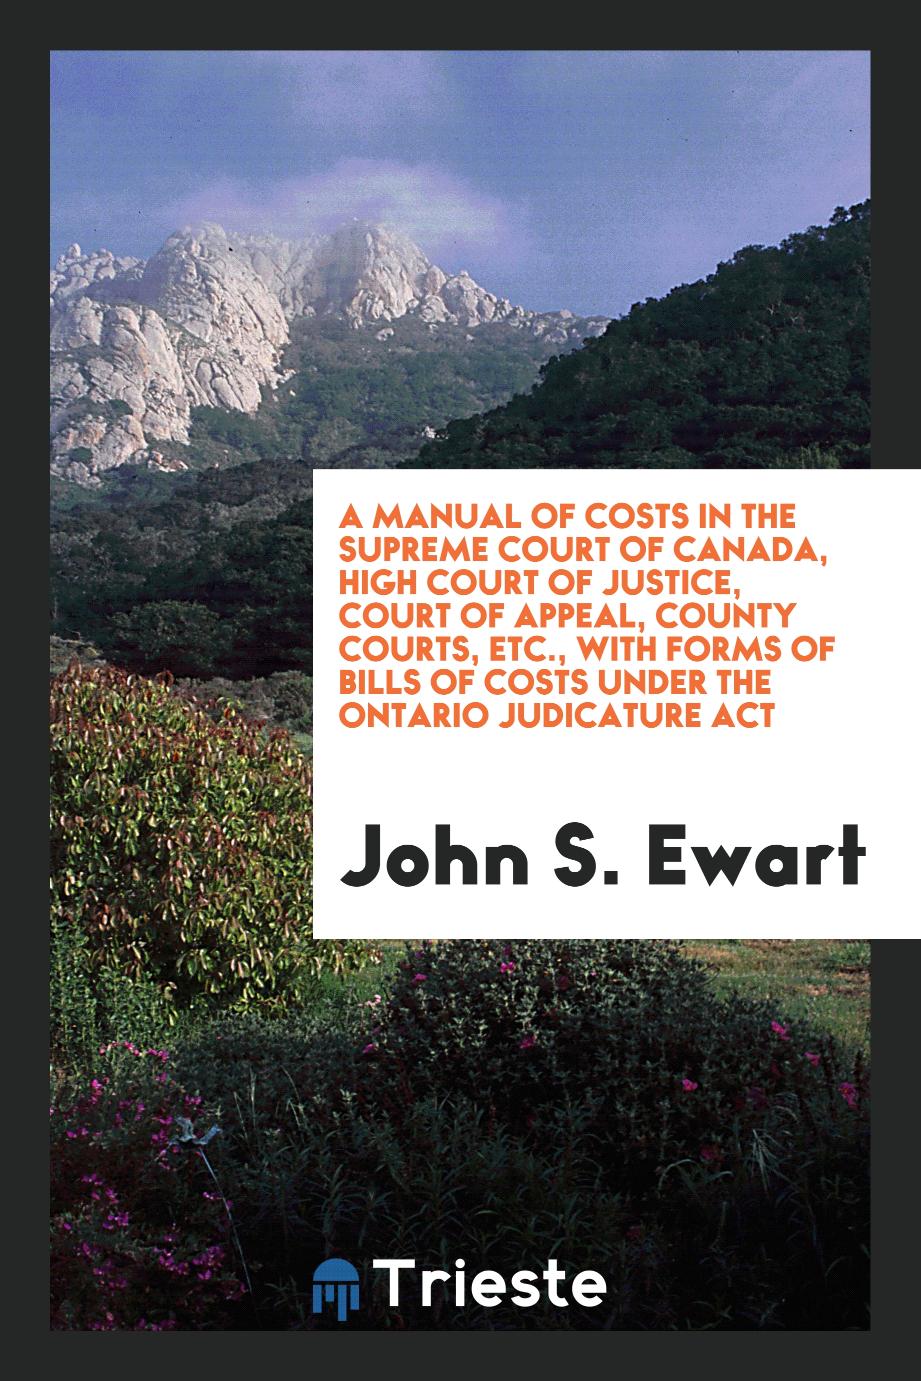 A Manual of Costs in the Supreme Court of Canada, High Court of Justice, Court of Appeal, County Courts, Etc., with Forms of Bills of Costs Under the Ontario Judicature Act